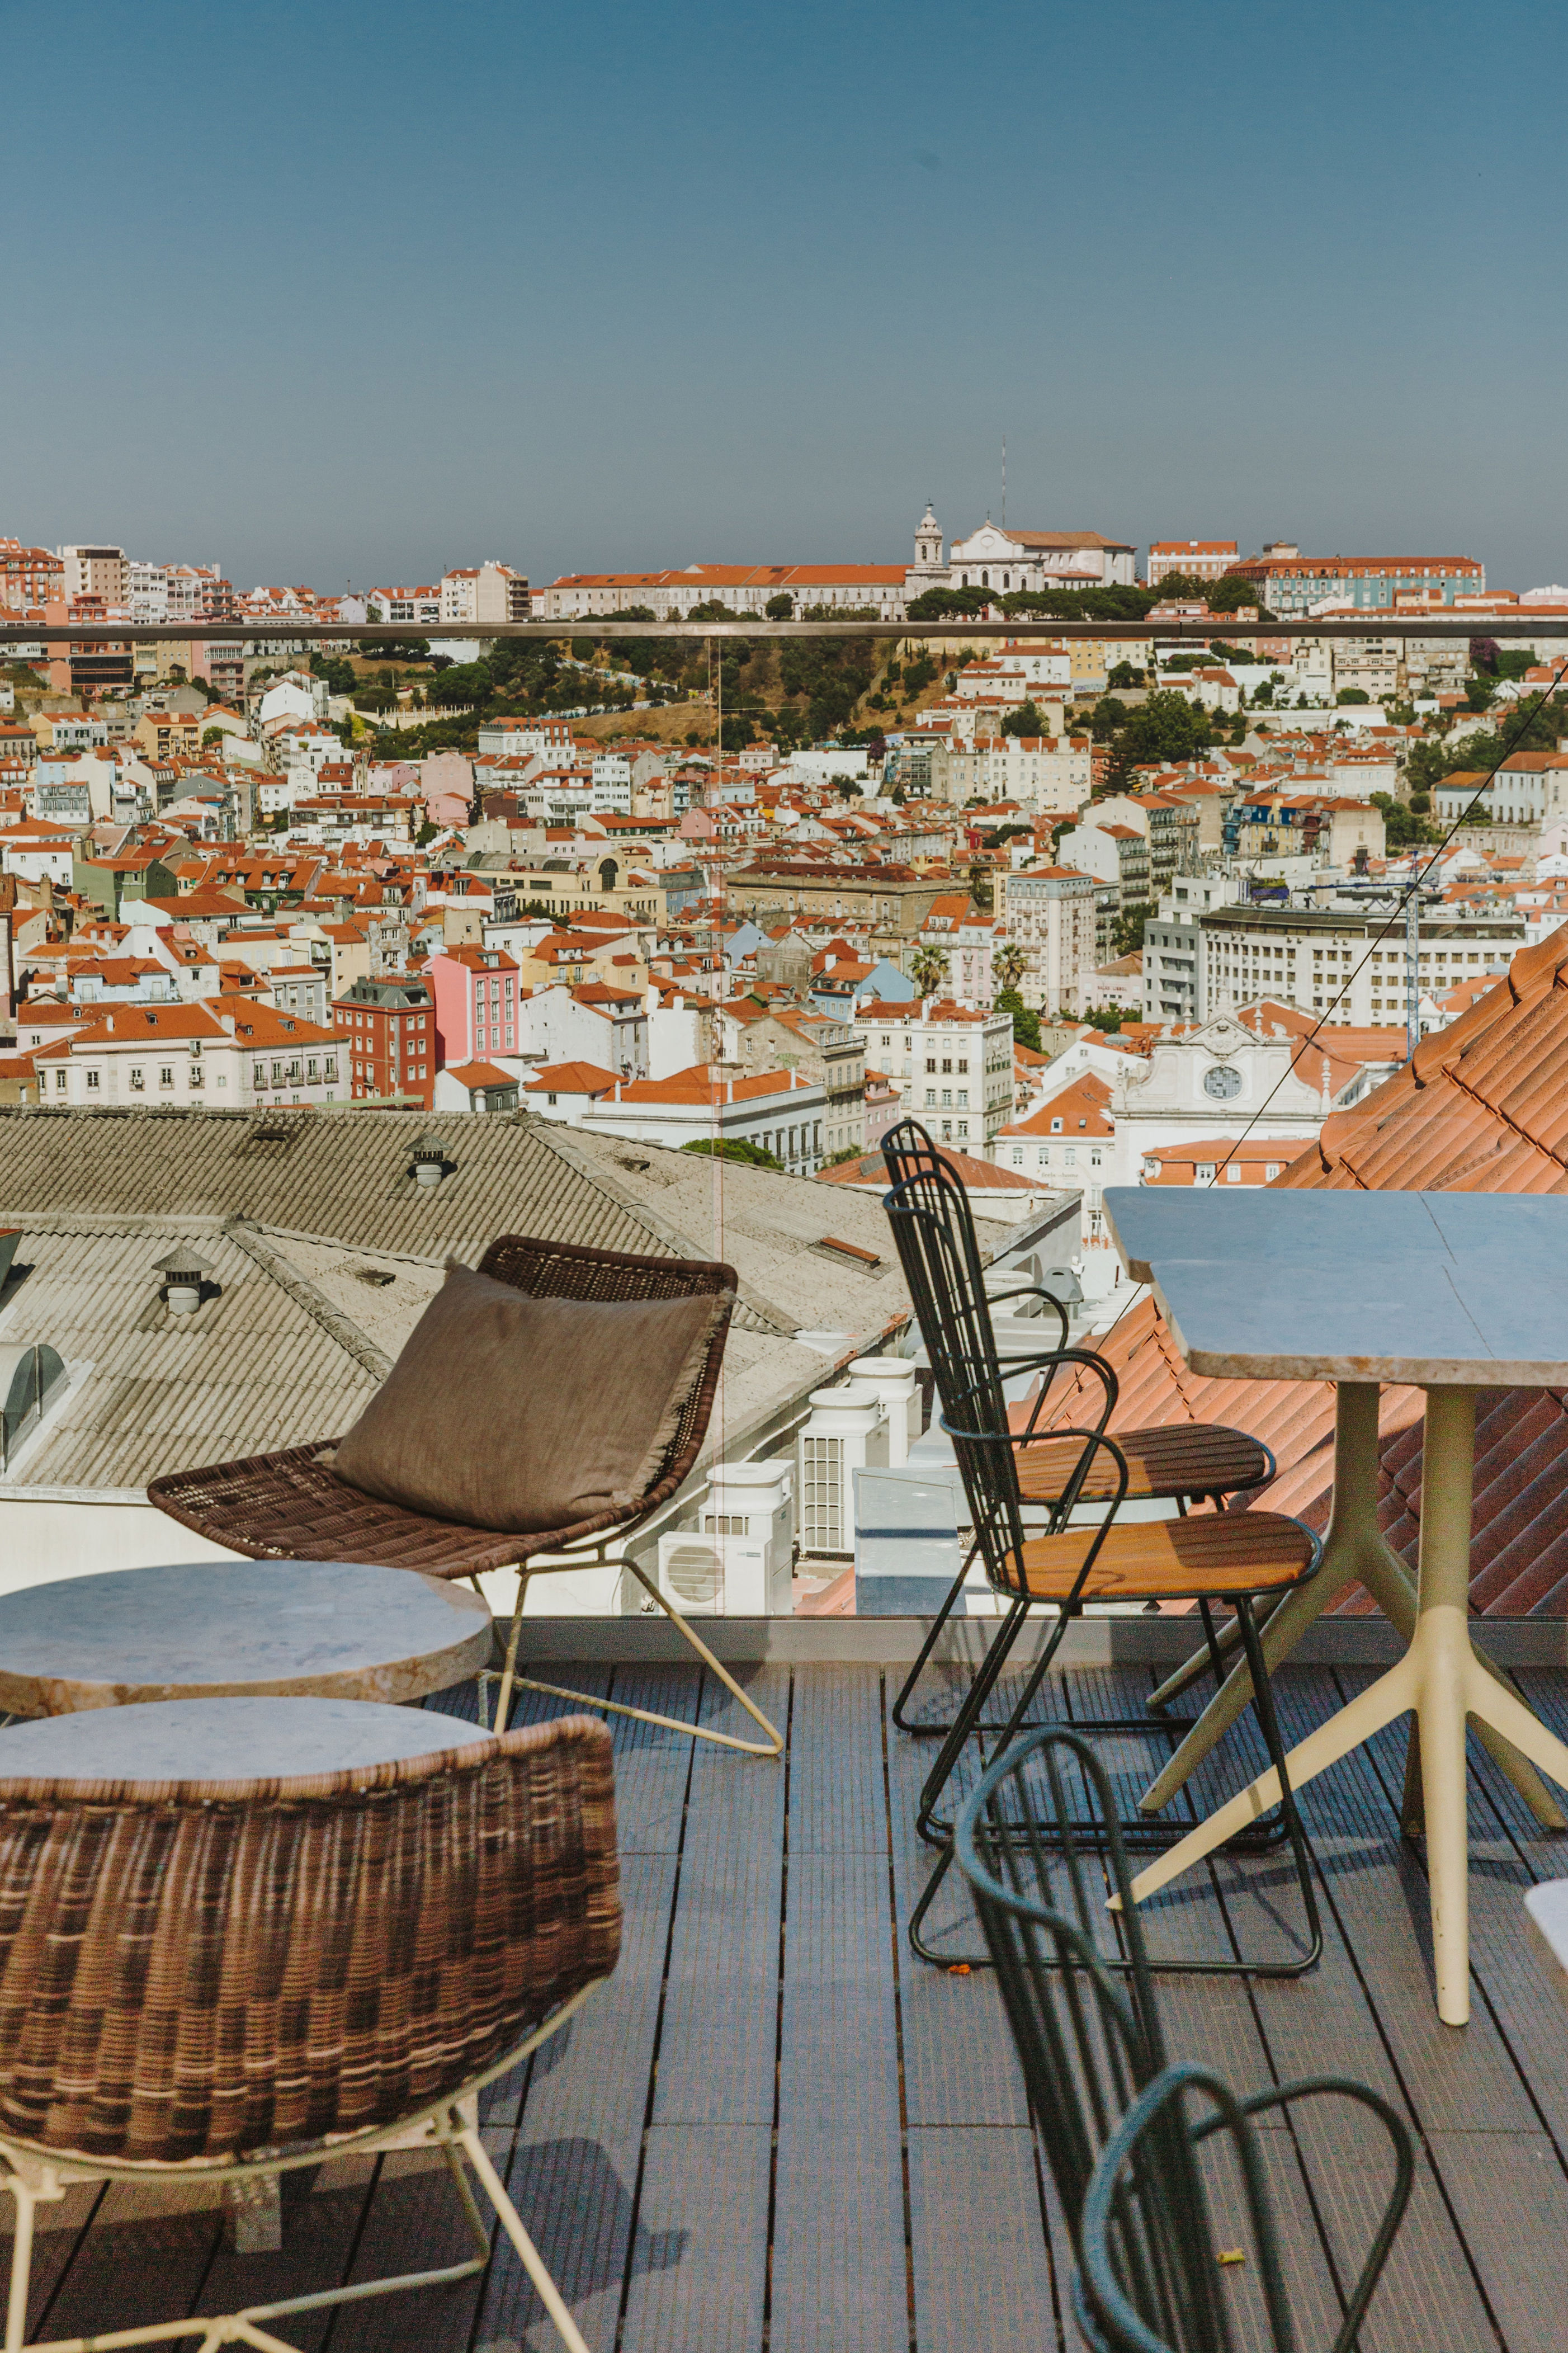 <p><strong>For grandeur</strong></p> <p>Situated in the bohemian Bairro Alto area, where you’ll find a maze of restaurants, bars, and nightlife, The Lumiares is designed to feel like a home away from home. Previously a derelict 17th century <a href="https://www.cntraveler.com/story/5-royal-palaces-where-you-can-spend-the-night?mbid=synd_msn_rss&utm_source=msn&utm_medium=syndication">palace</a>, the hotel’s design pays homage to Lisbon’s colors, patterns, and light with collaborations from local artists and makers. From the sleek reception to calming spa treatment rooms, each design detail has been cleverly thought-out and perfectly executed.</p> <p>Rooms range from self-contained studios, with a fully-equipped kitchen, to Mezzanine rooms occupying two levels and penthouse suites with balconies showcasing panoramic views of the city. Each one is designed to feel personal and comforting, with an unmistakable Portuguese elegance. —<em>Abigail Malbon</em></p> <p><strong>Price</strong>: Doubles from $223</p> <p><strong>Address:</strong> <a href="https://www.google.com/maps/place/The+Lumiares+Hotel+%2526+Spa/@38.7138442,-9.1442213,15z/data=!4m9!3m8!1s0xd19338013909af3:0x458c1635d8d10dab!5m2!4m1!1i2!8m2!3d38.7138442!4d-9.1442213!16s%252Fg%252F11c32622j6">R. do Diário de Notícias 142, 1200-146 Lisboa, Portugal</a></p> <div class="callout"><p><a href="https://cna.st/affiliate-link/2xoTpiFhHURJG7BVF3jooi6FWUJrj83GnoHLySxEGGSTruB9QPVfUqxqVYvM9QGbSQ3HvUdb1iqi1NQE3zTVBL6P9oiSjRhiyZu3ZsnxxLG9eVbZGnV5mvrkHu98CGYUSJWDNX9ekK4ke8Xsi8rf3ykCLa3vBQs2PX4fNcQs4XrnpMDFHieqHHcVPpTfBma7tiudDjsKZVCg2LyaHHvRoGxc8TdXgwezebbcRSwwiMLWaN14mzmqdqudUVYG6TC2bXD5HS55" rel="sponsored" title="Book now at Expedia">Book now at Expedia</a></p> <p><a href="https://cna.st/affiliate-link/ho5L3zdaYSc5FoLKyjhAkc7xQYkYSpq83d2qBN8jcKYf5KaoPfen5w8BpbWUAdQxEvxADrFsFsbZXMJAkvEVu2PH99hWG2F97zUdEJuH6zZn3TghQCoRxA26Fq6sdxVPdfcqrde78z6QxUWHamvqtpecKR" rel="sponsored" title="Book now at Booking.com">Book now at Booking.com</a></p> </div><p>Sign up to receive the latest news, expert tips, and inspiration on all things travel</p><a href="https://www.cntraveler.com/newsletter/the-daily?sourceCode=msnsend">Inspire Me</a>